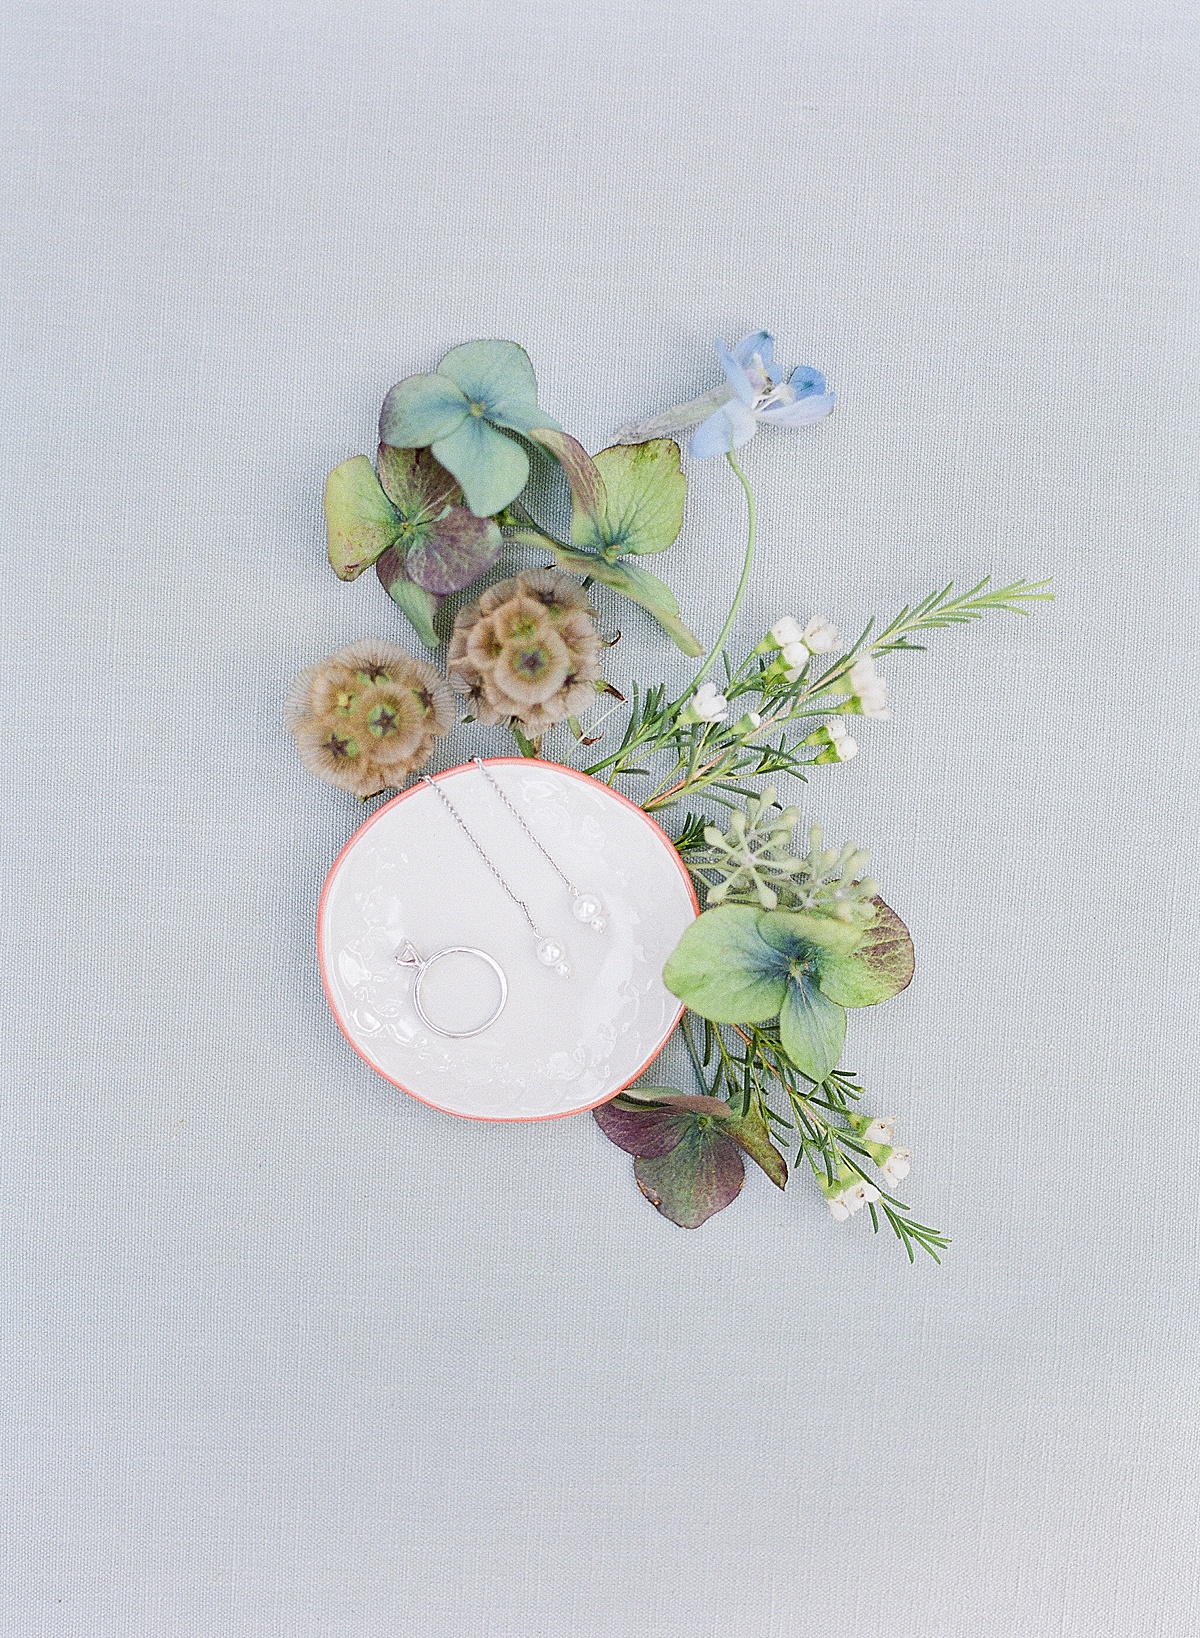 Ring Dish with Earrings, Ring and Flowers Photo